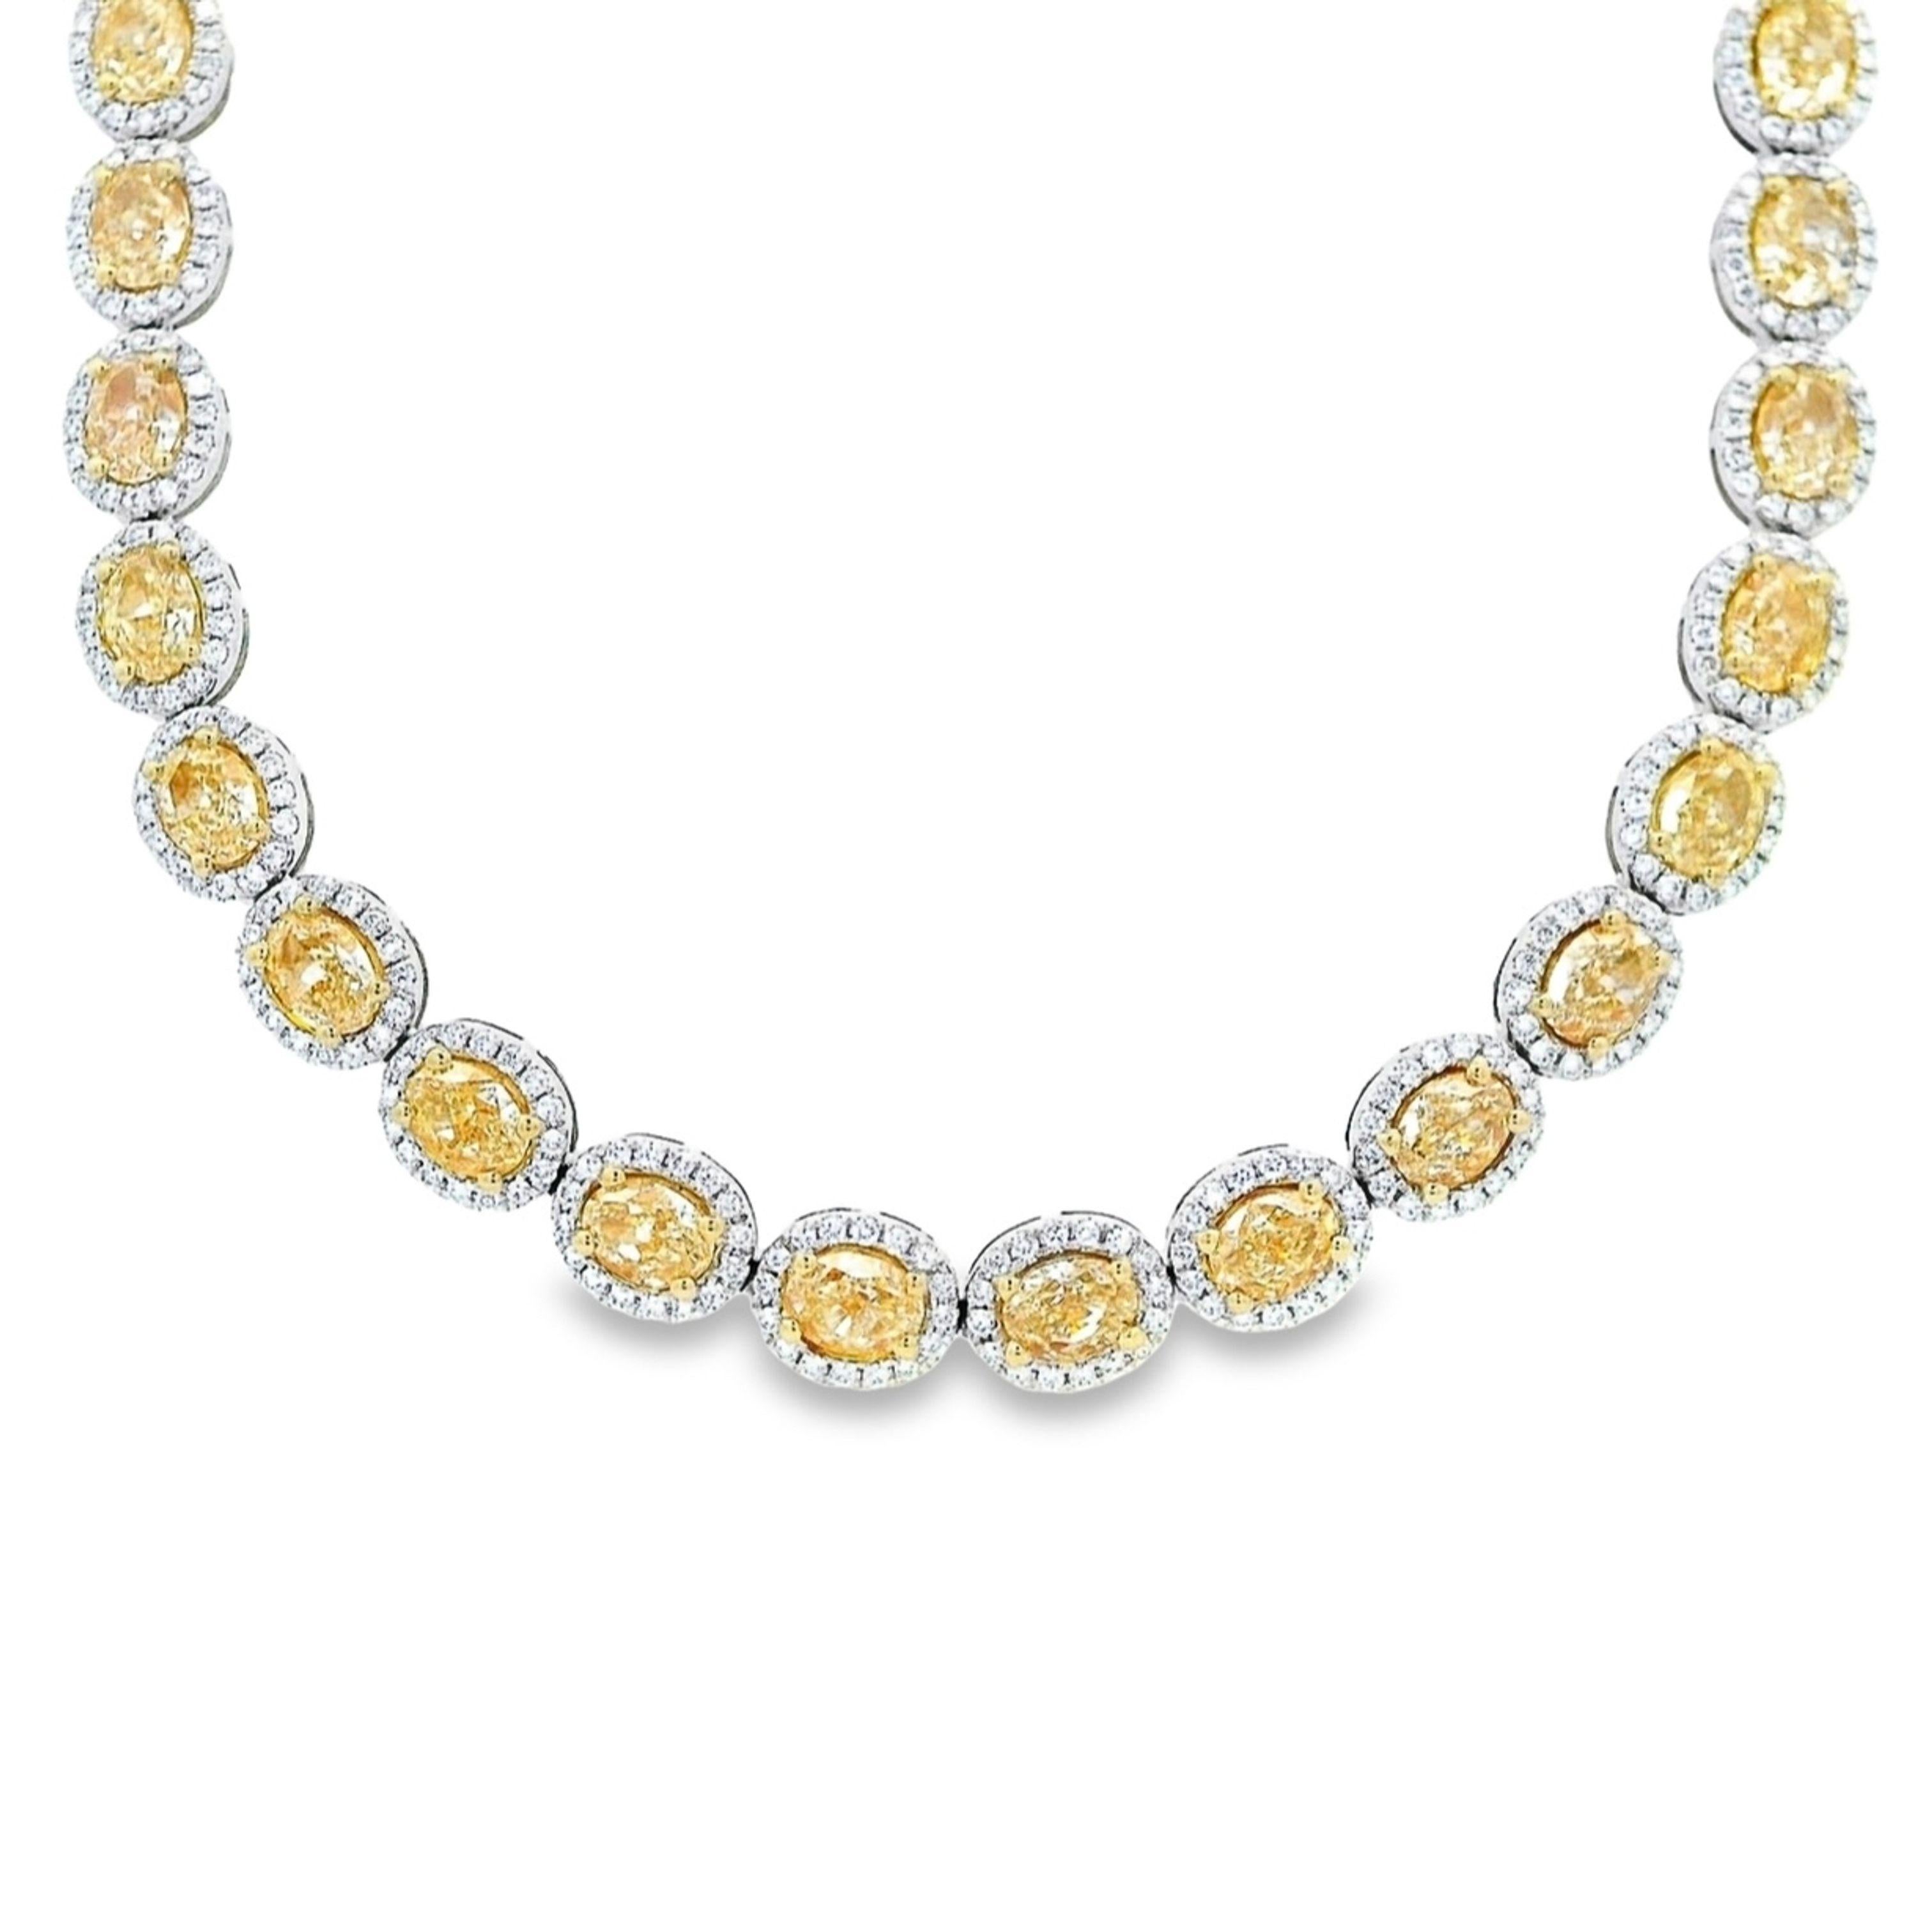 Stunning yellow oval diamond bracelet in 18k two tone gold, high jewelry by Alexander Beverly Hills.
22.37 carats total diamond weight.
52 oval diamonds, 19.28 carats. Approximately Fancy/Fancy Light Yellow color and VS clarity. Complimented by 832